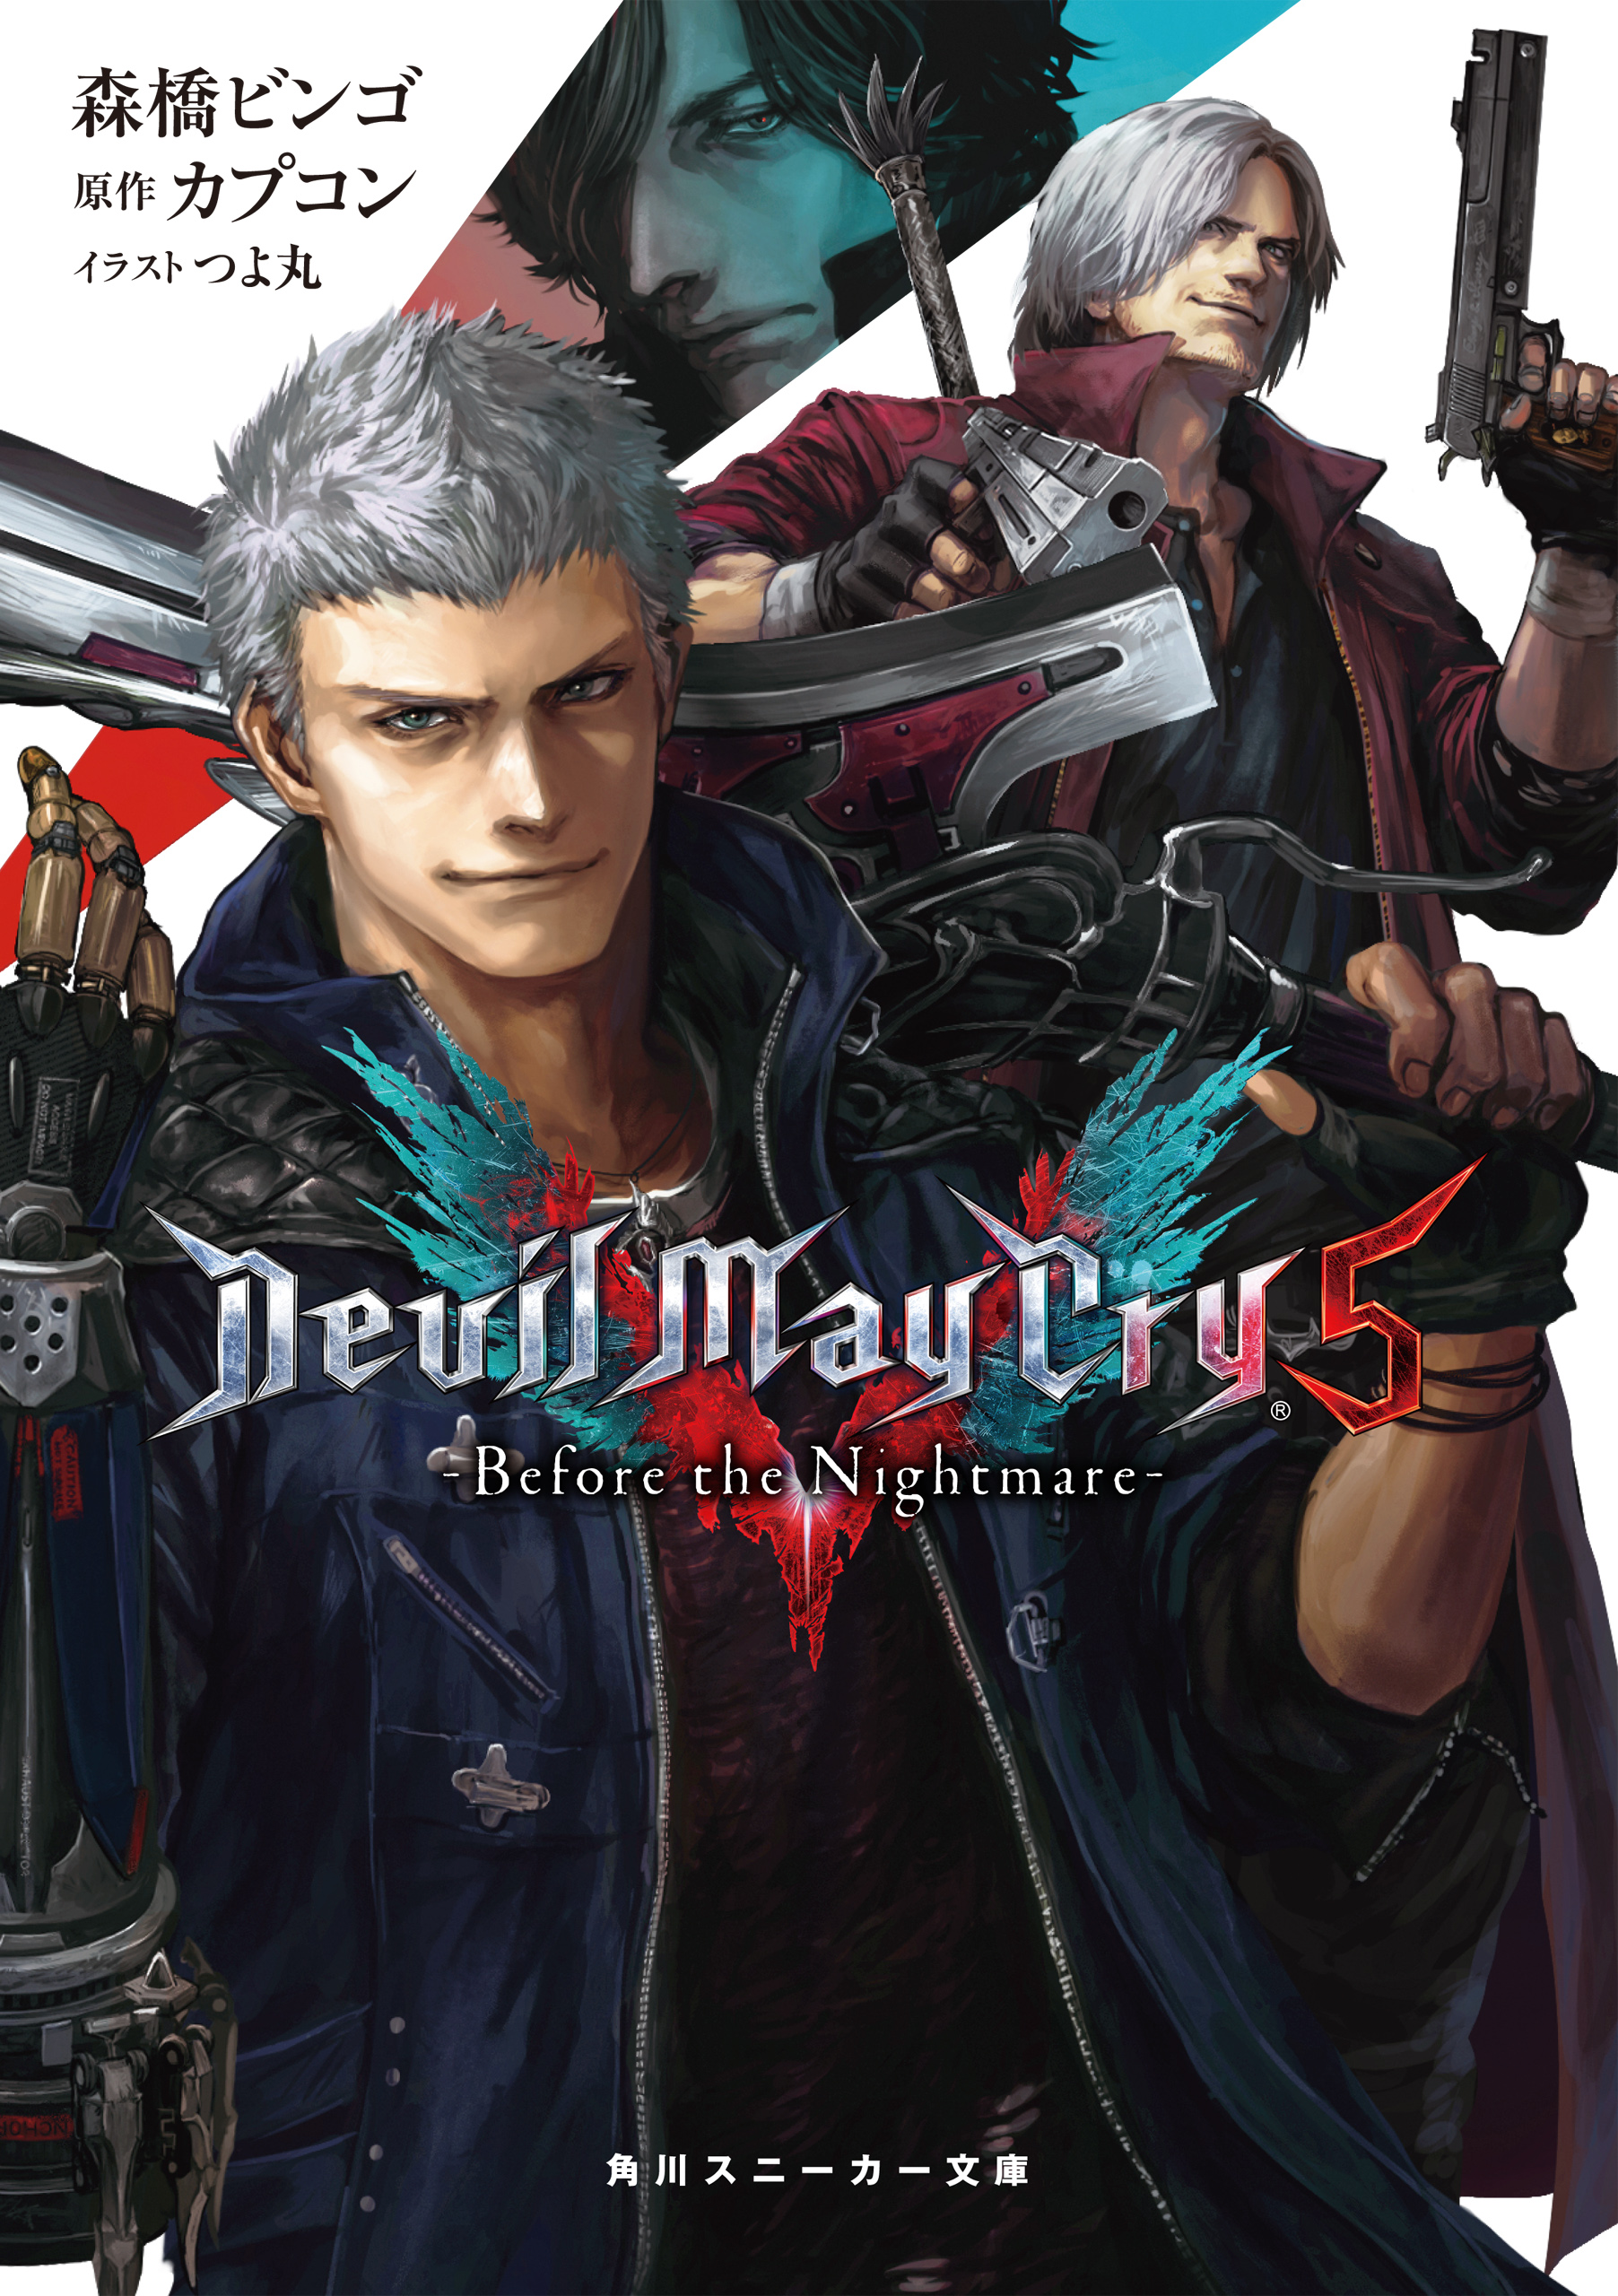 Devil May Cry 5: Before the Nightmare | Devil May Cry Wiki | Fandom